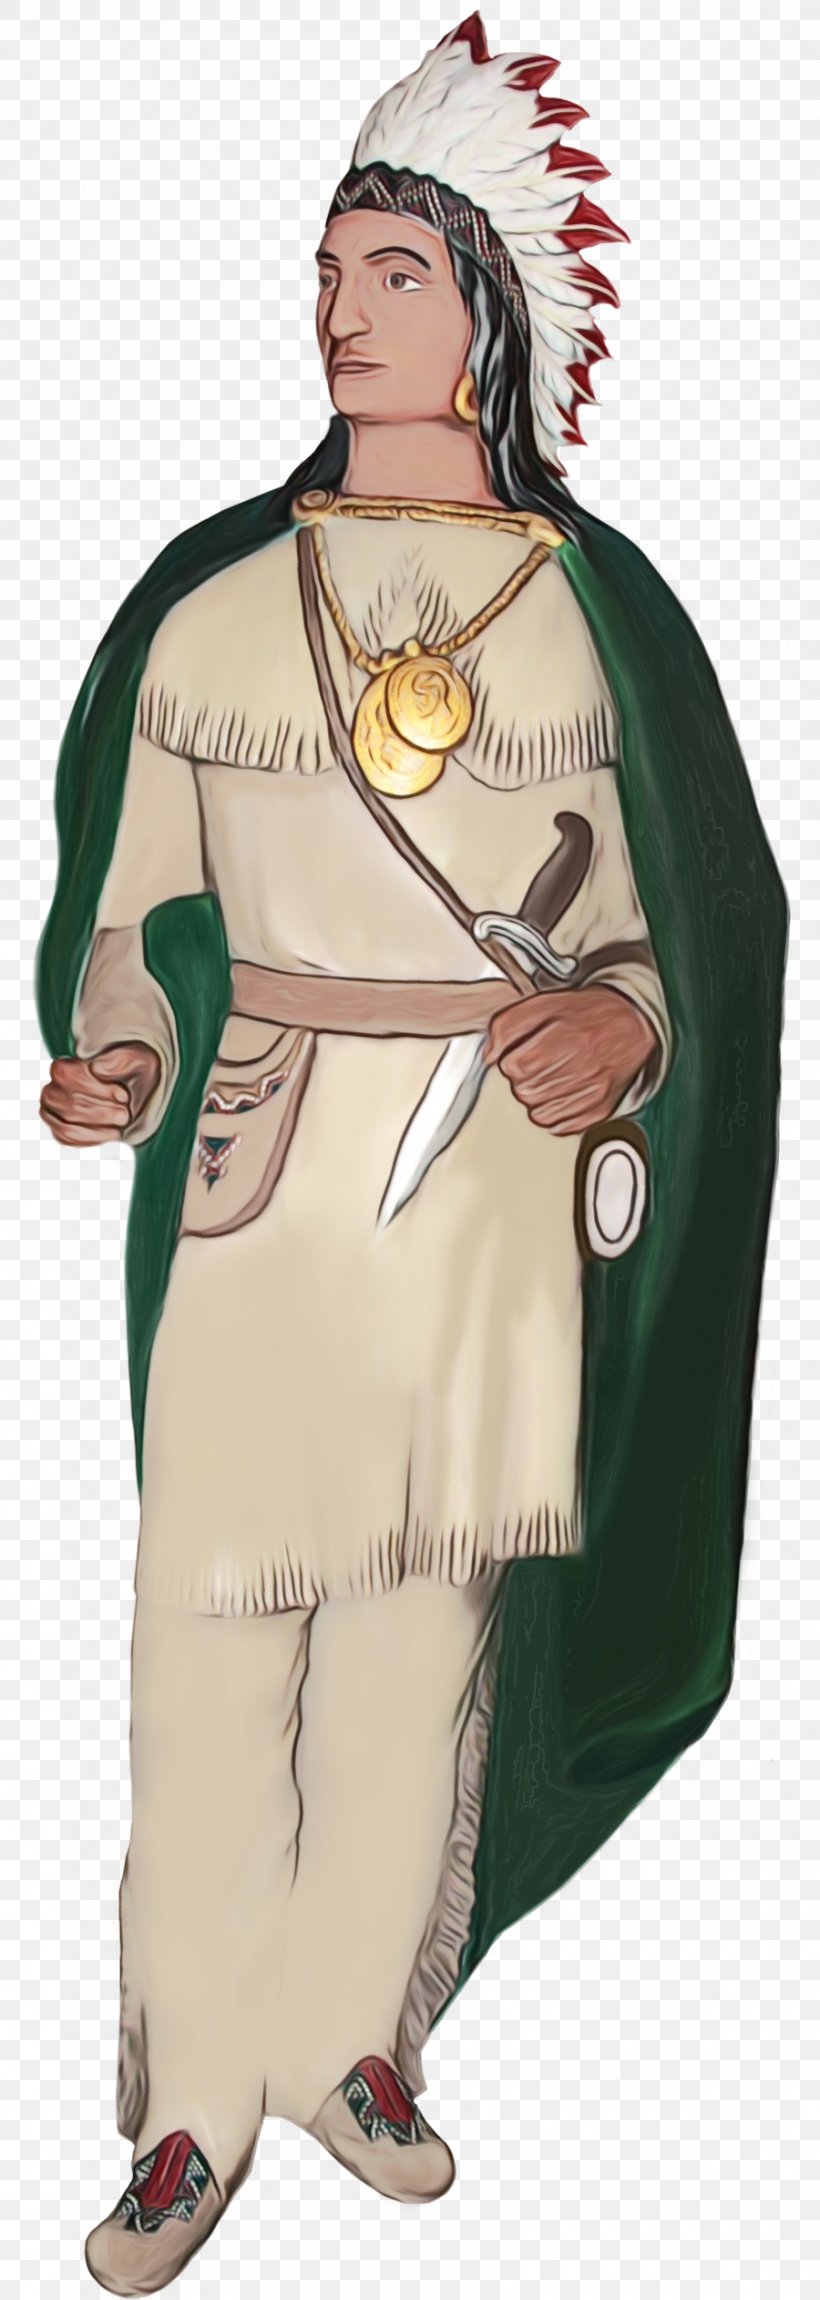 Green Costume Fictional Character Costume Design Uniform, PNG, 900x2525px, Watercolor, Costume, Costume Design, Fictional Character, Green Download Free